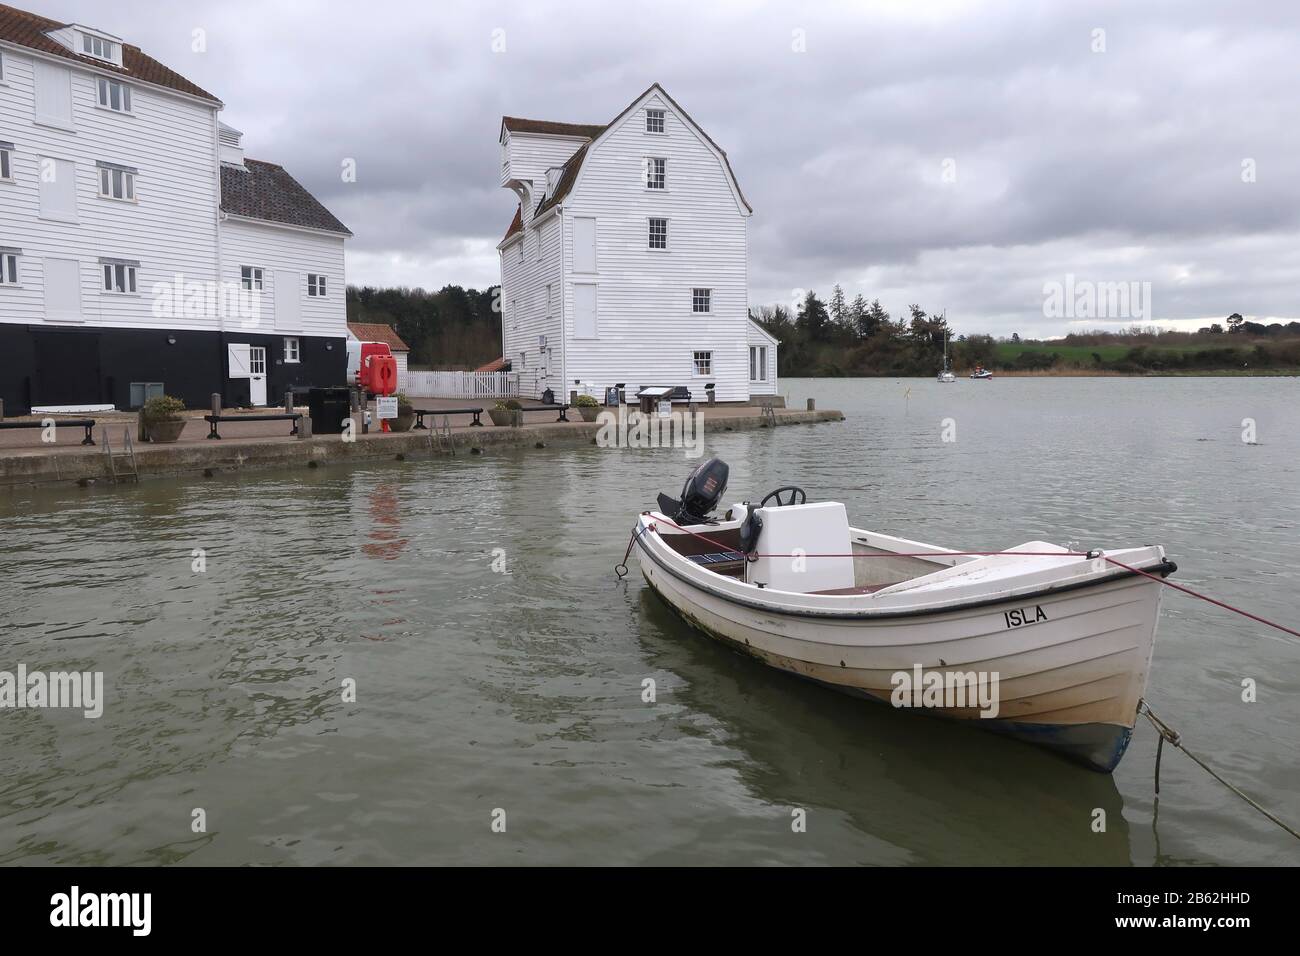 Woodbridge, Suffolk, UK - 9 March 2020: The Tide Mill. Wet and windy afternoon walk alongside the River Deben from Woodbridge to Melton. Stock Photo